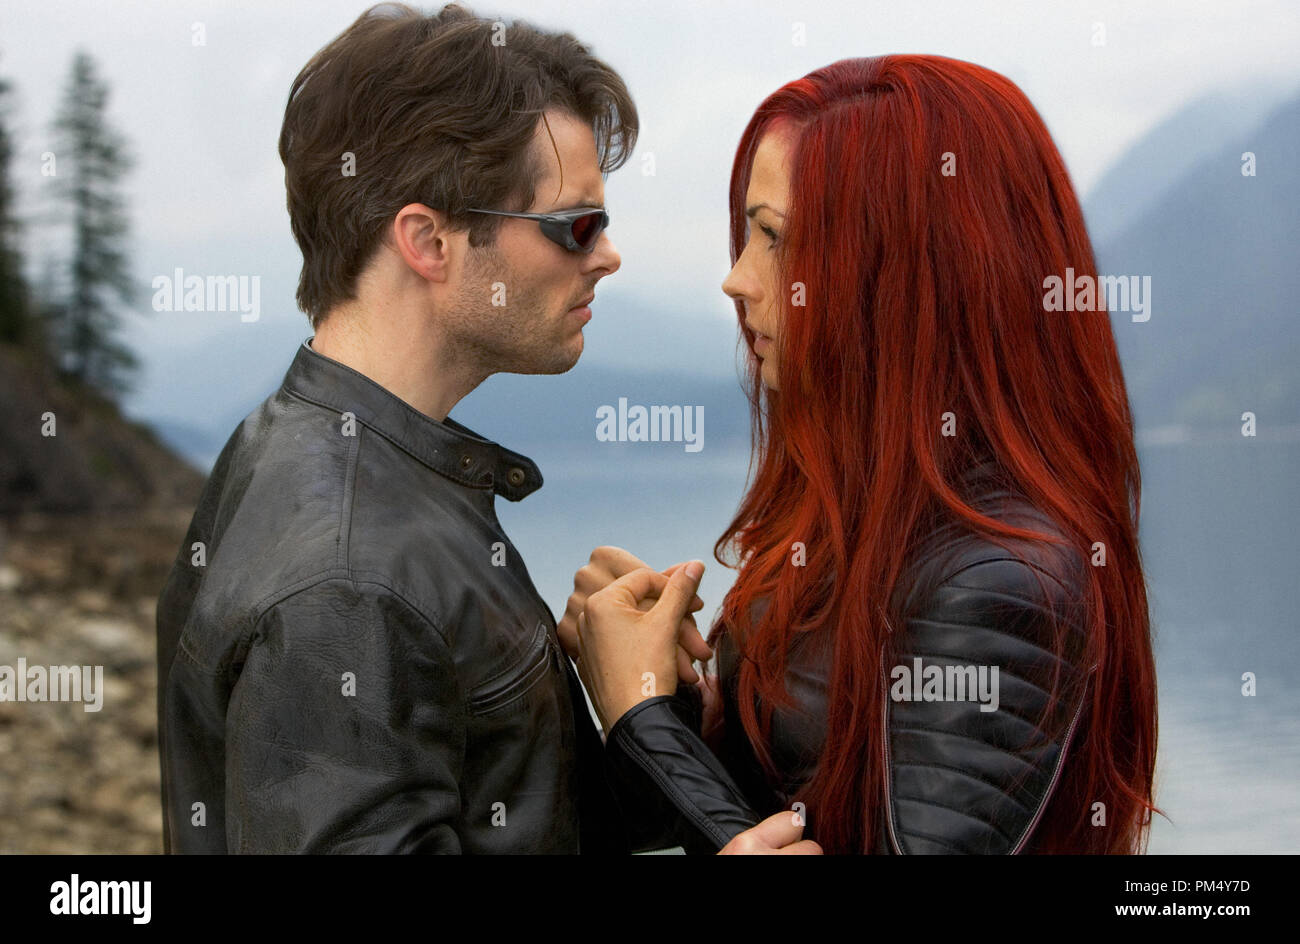 Studio Publicity Still from 'X-Men: The Last Stand' James Marsden, Famke Janssen © 2006 20th Century Fox Photo credit: Kerry Hayes   File Reference # 307372837THA  For Editorial Use Only -  All Rights Reserved Stock Photo